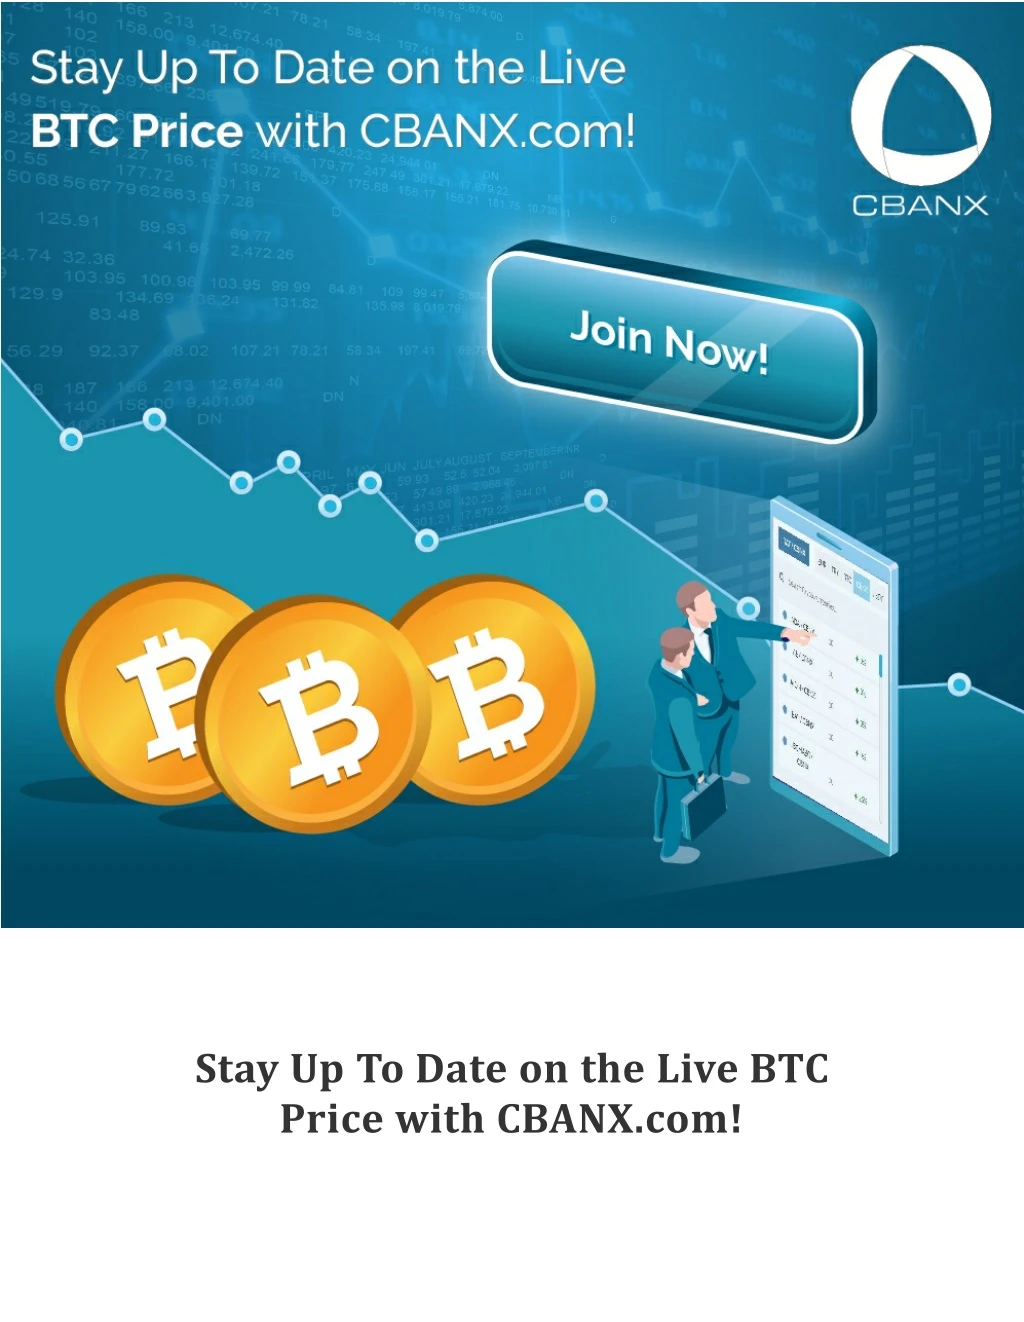 stay up to date on the live btc price with cbanx